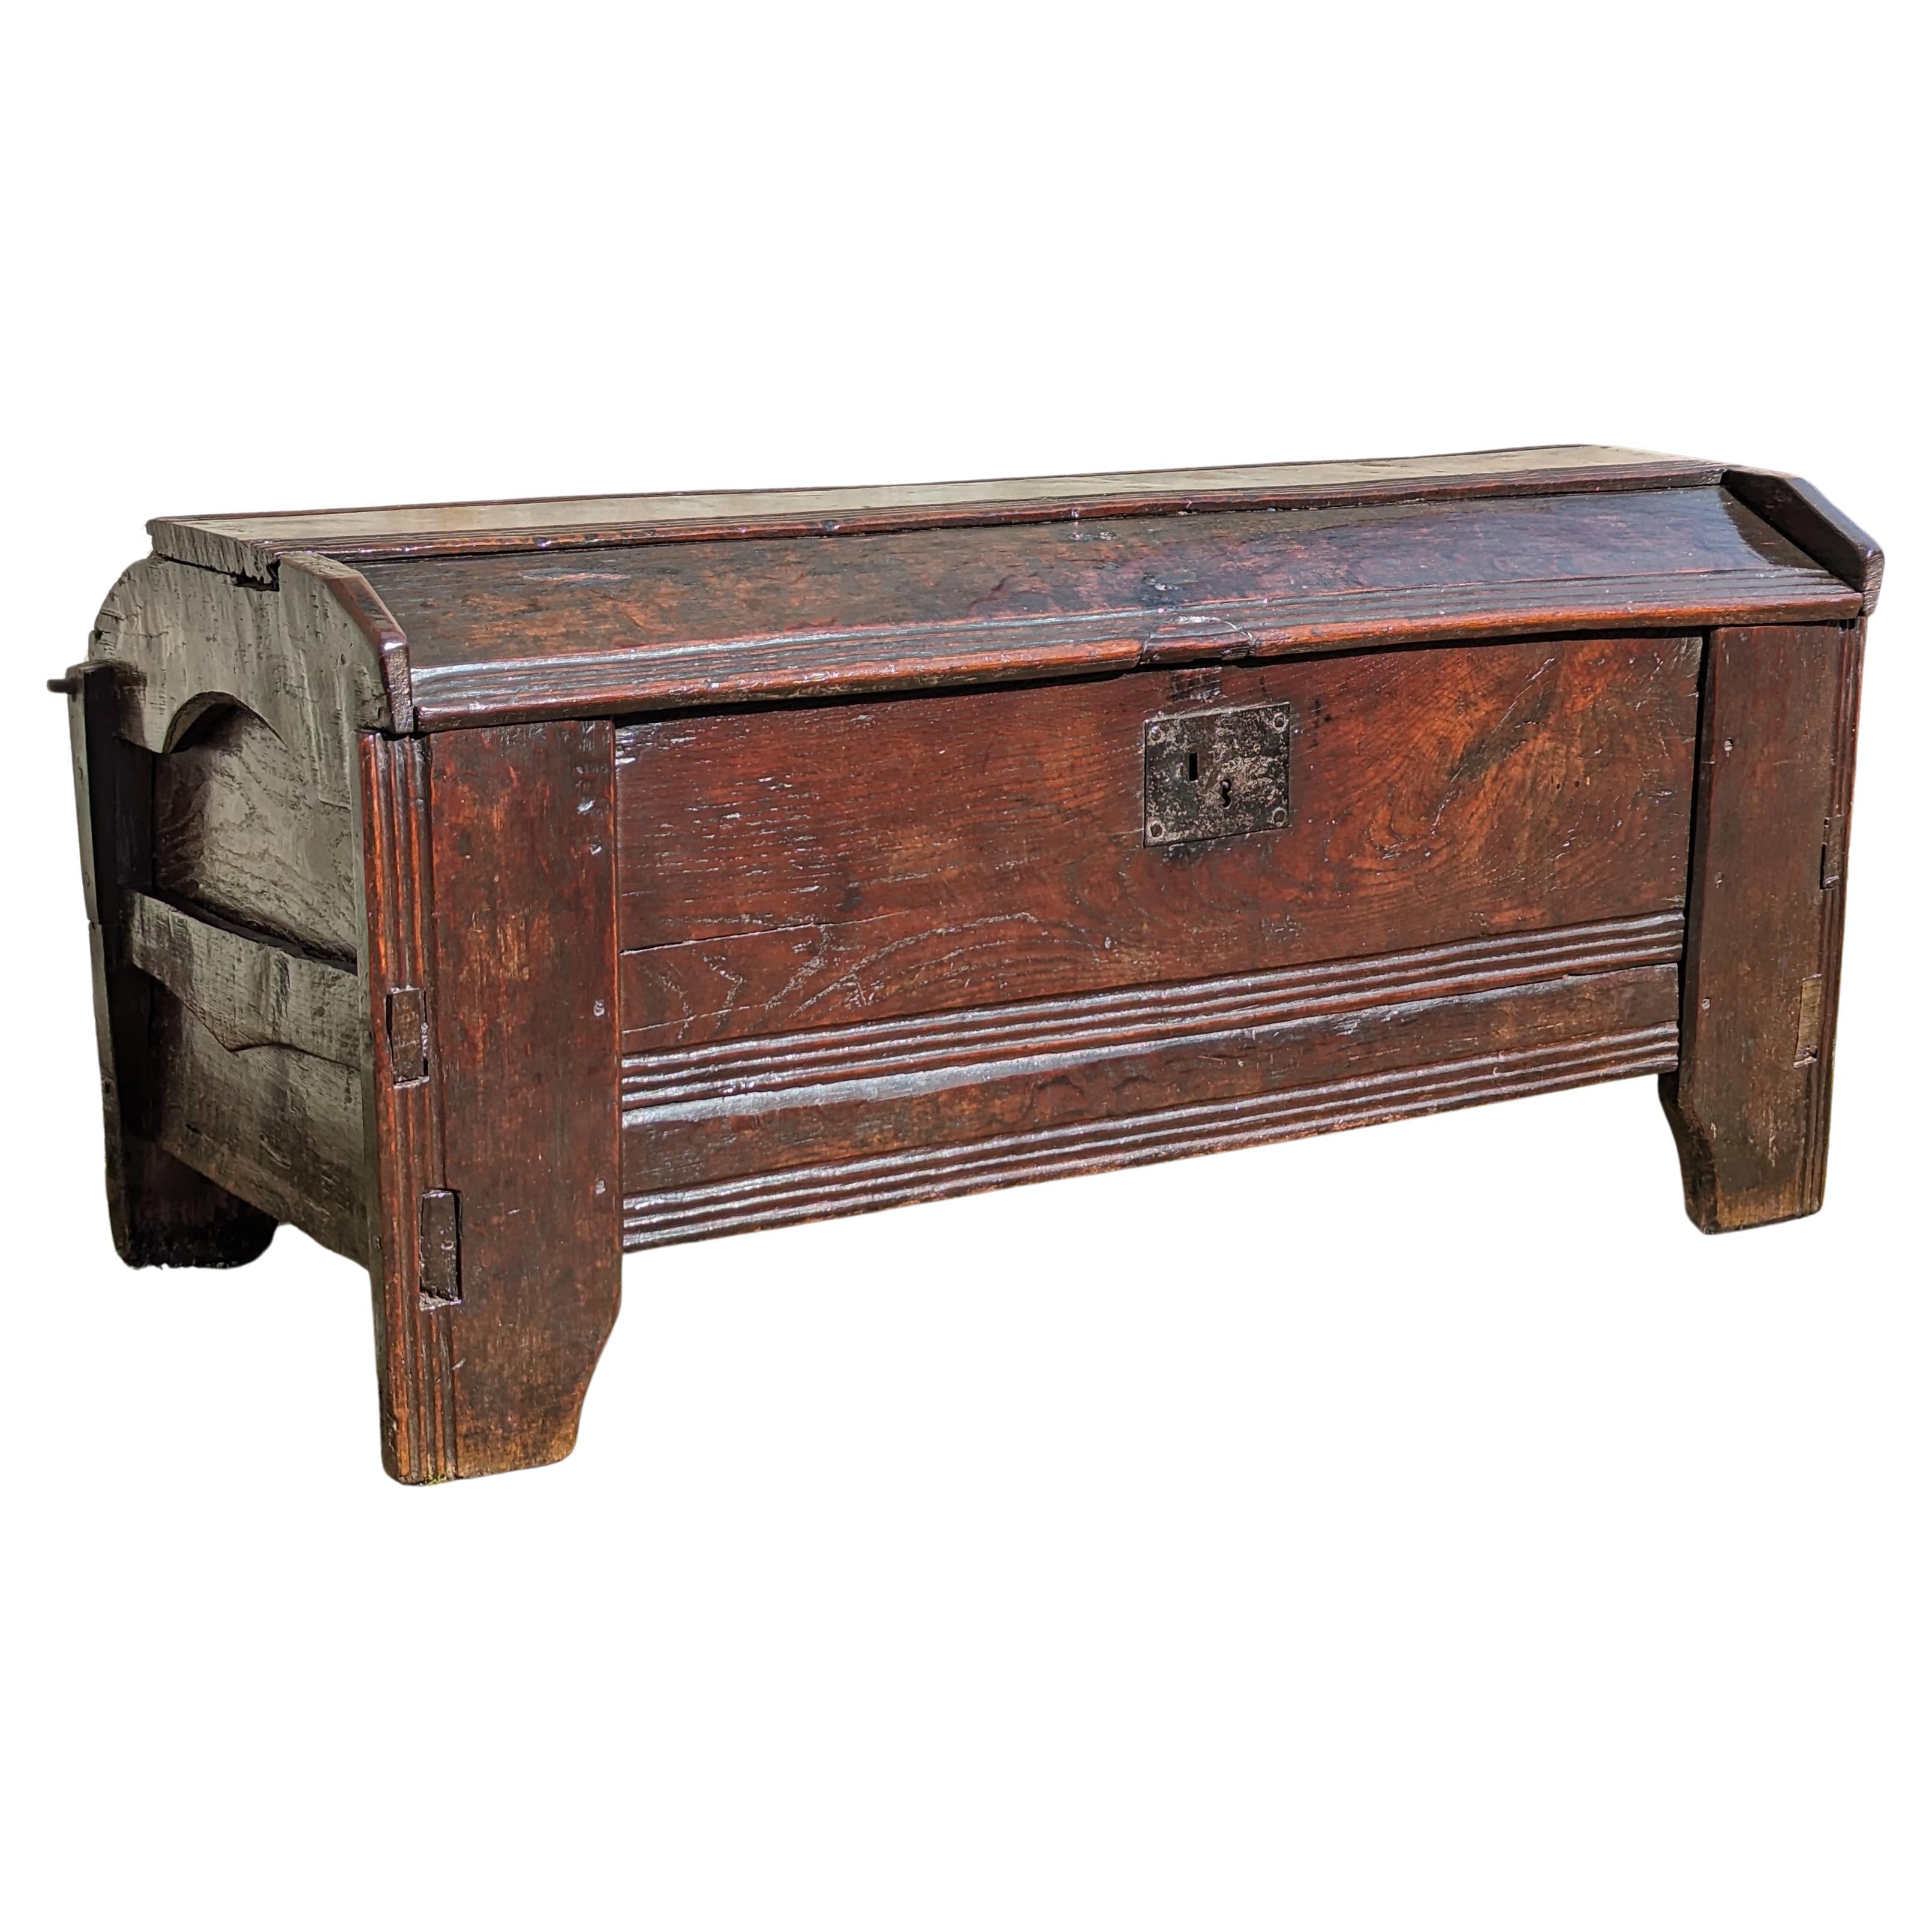 A 16th Century Boarded Oak Clamp-front Chest Or Ark, Welsh Borders, Circa 1550 For Sale